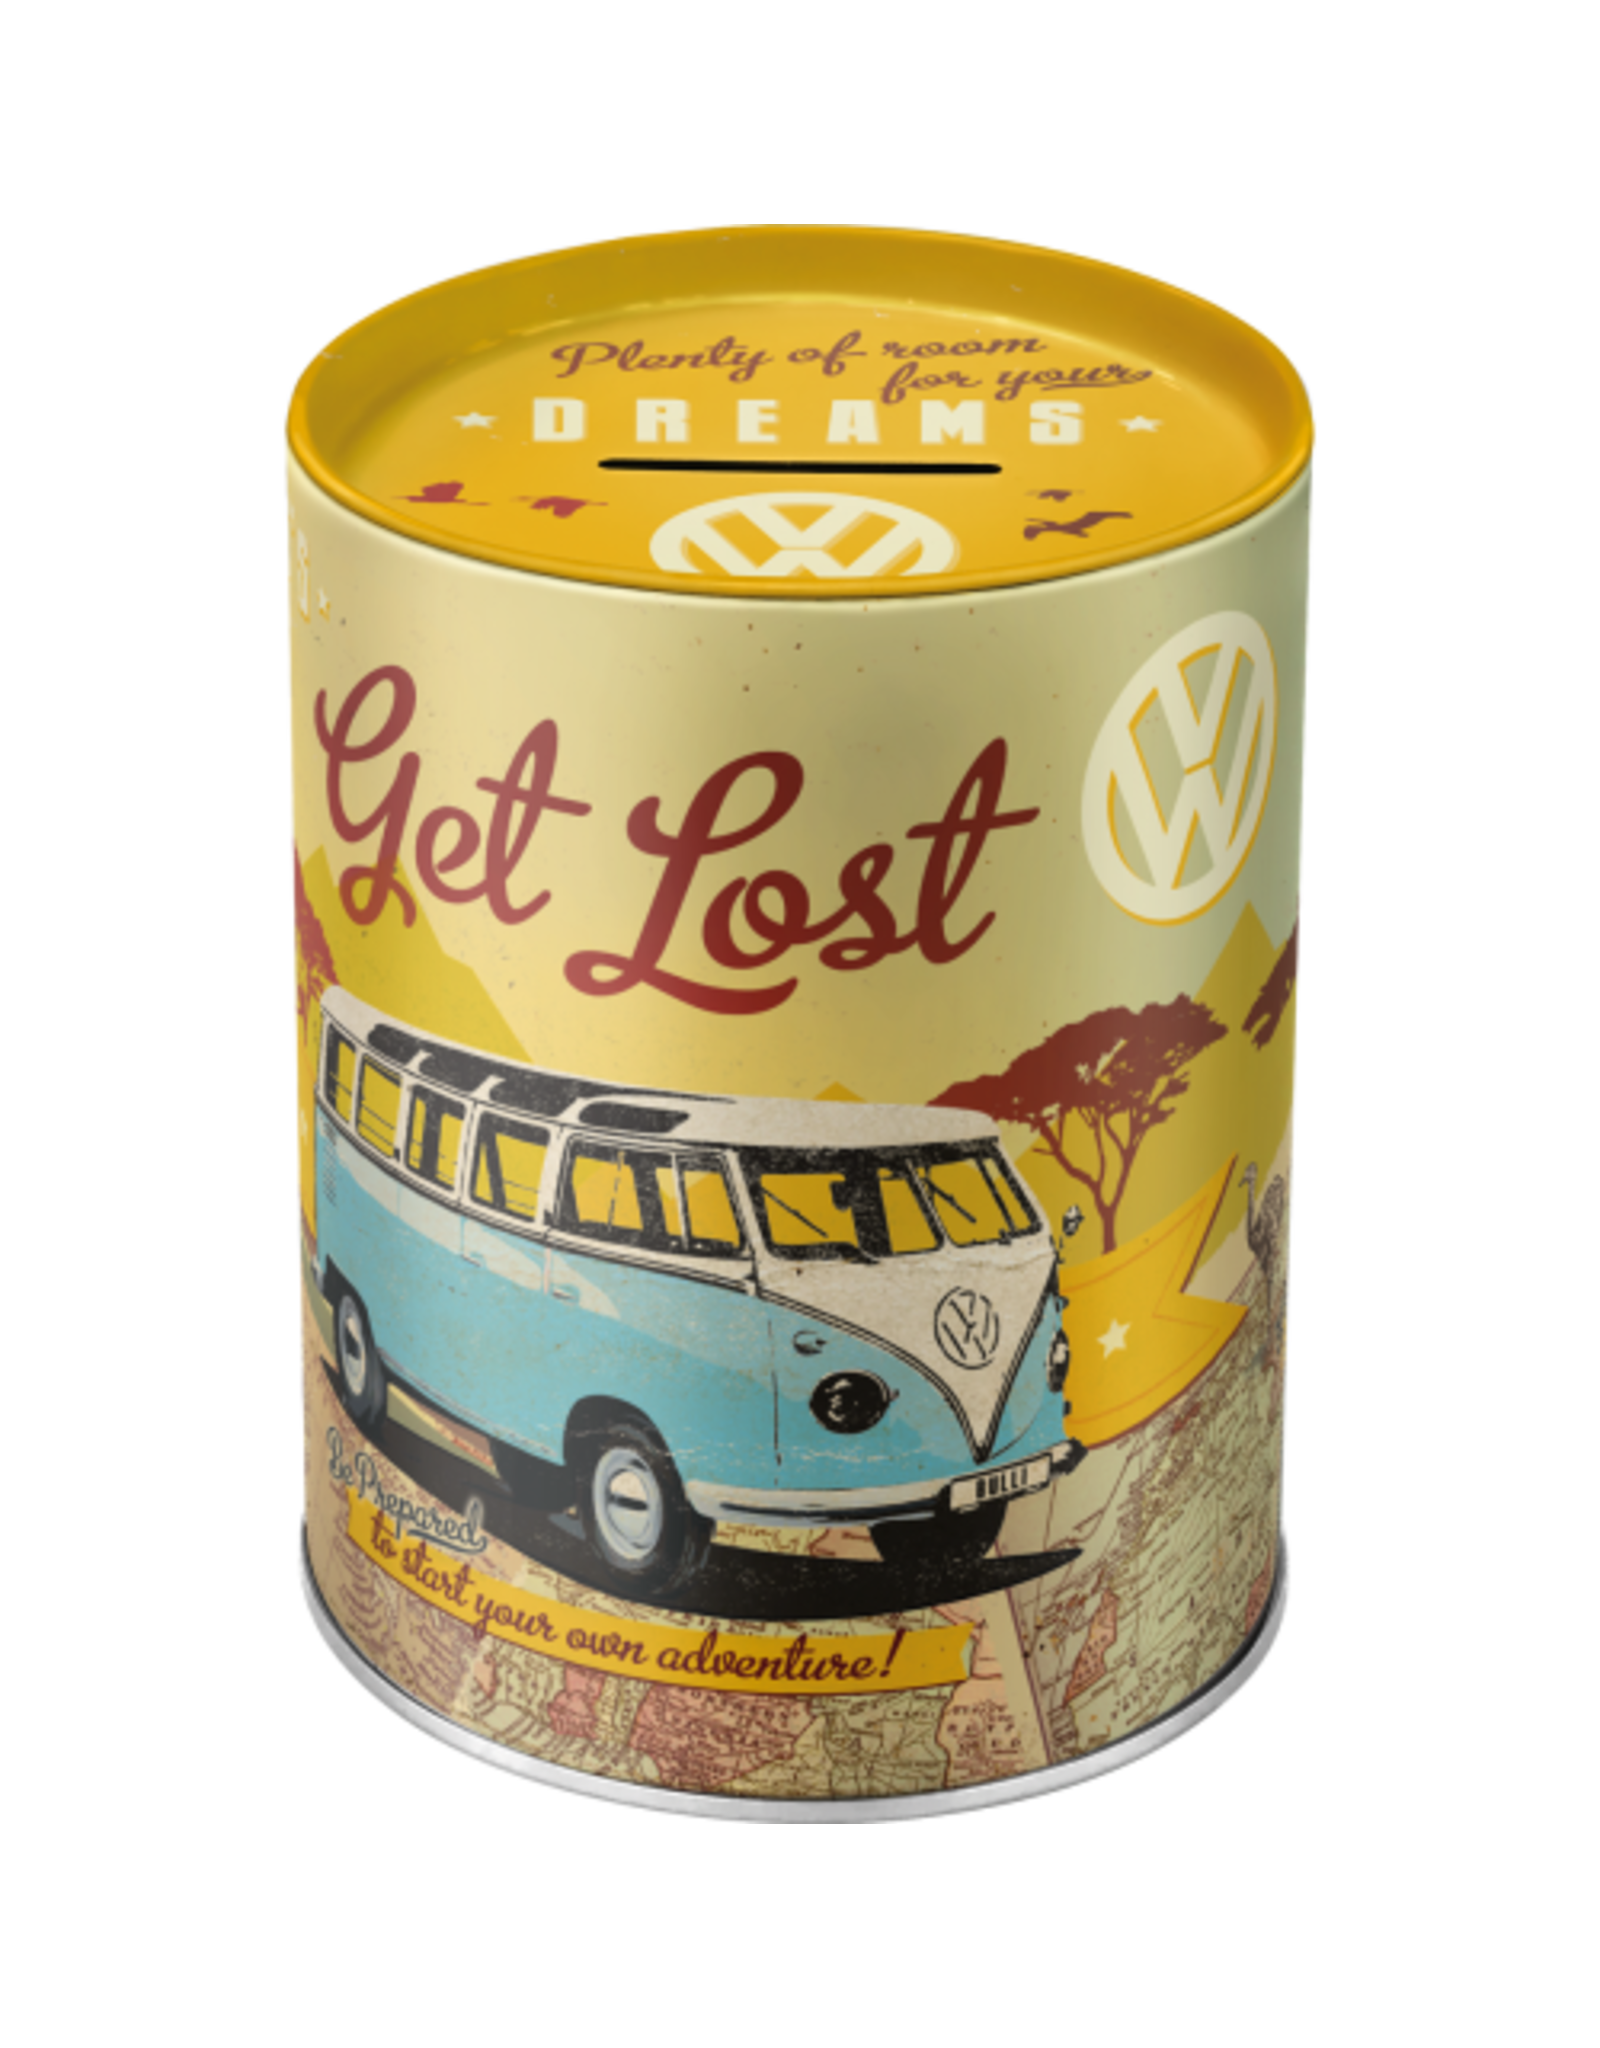 Jelly Jazz moneybox - let's get lost VW